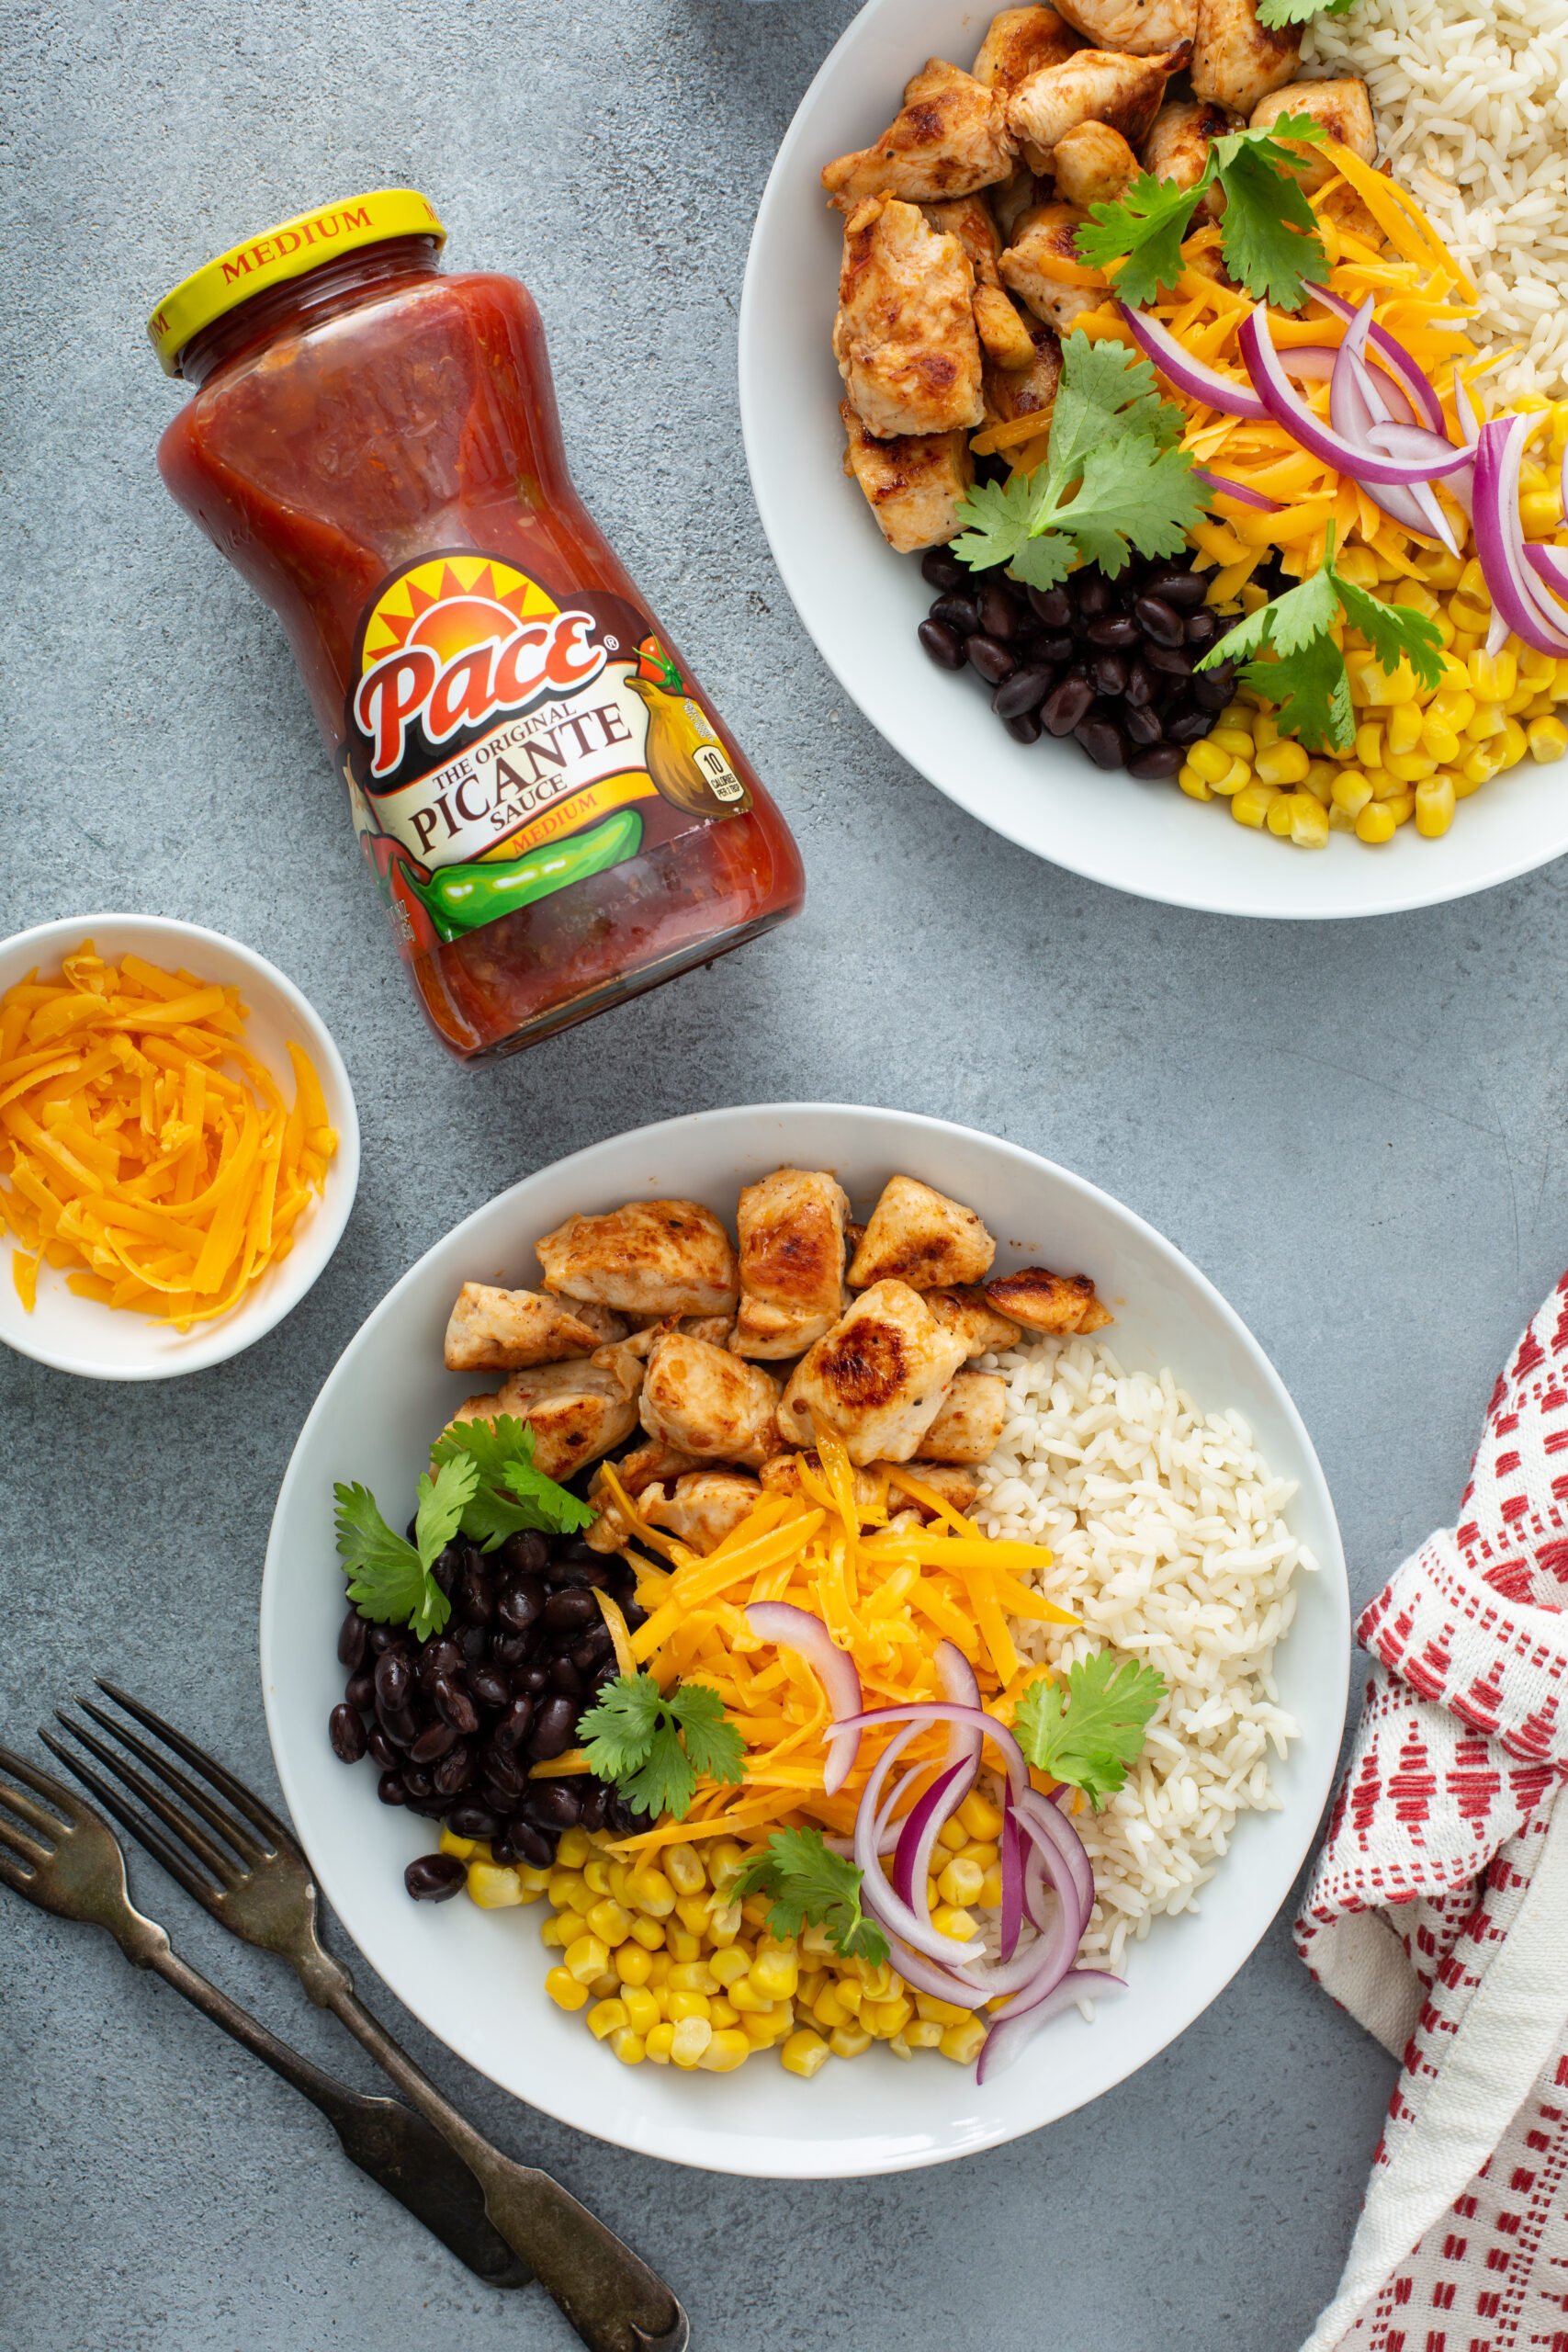 These Easy Spicy Chicken Rice Bowls are the perfect meal to make during the week and pack the next day for leftover. CLICK HERE to see how to make them!